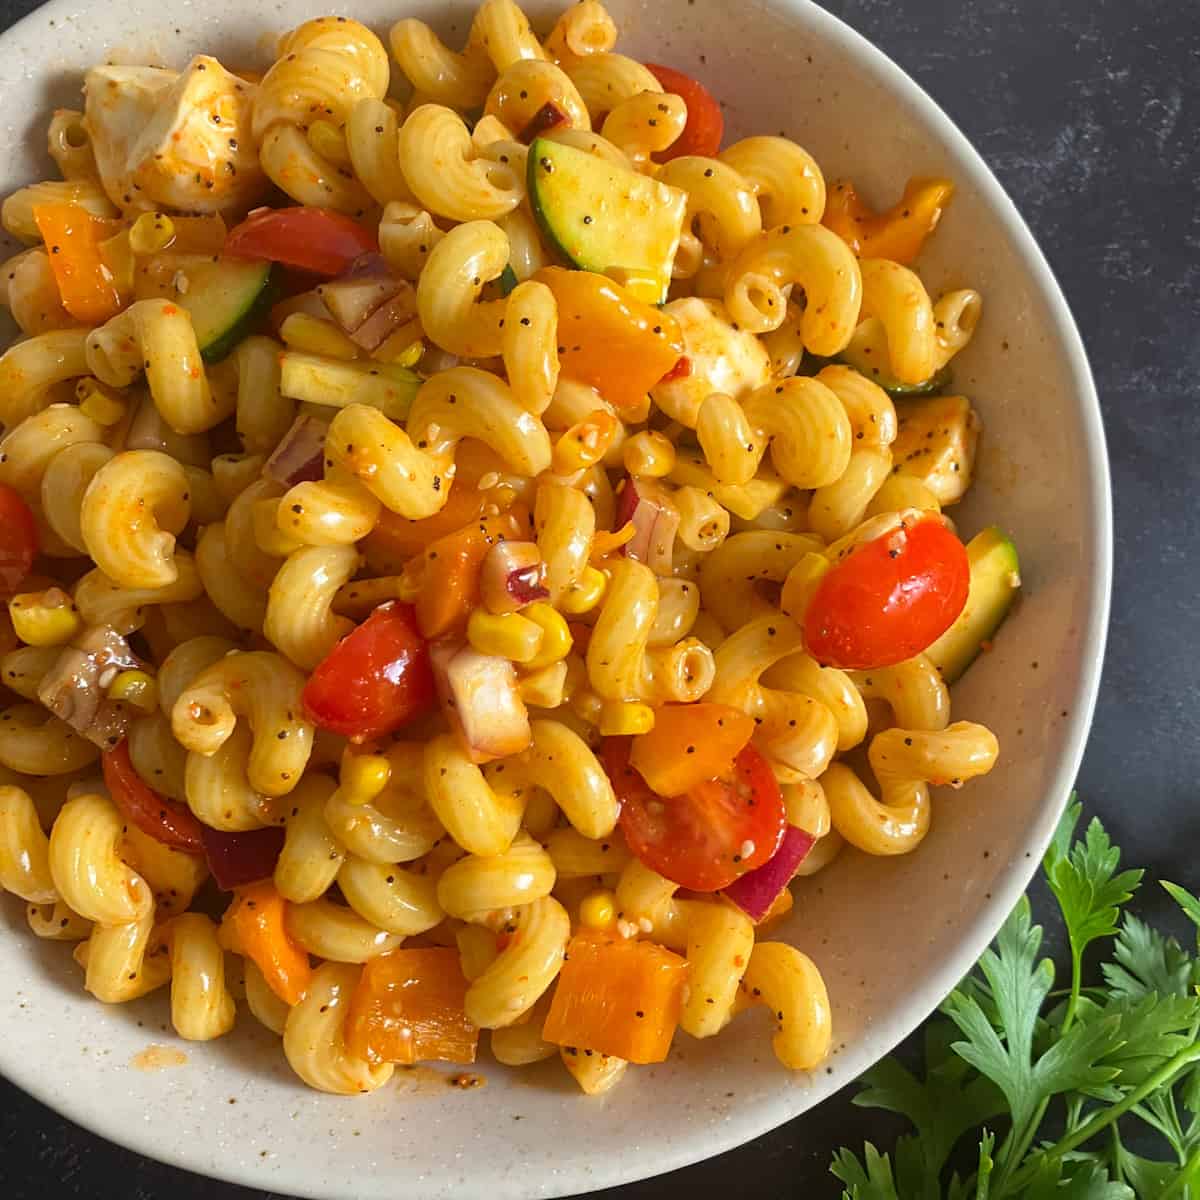 Zesty Pasta Salad Supreme - Baked Broiled and Basted